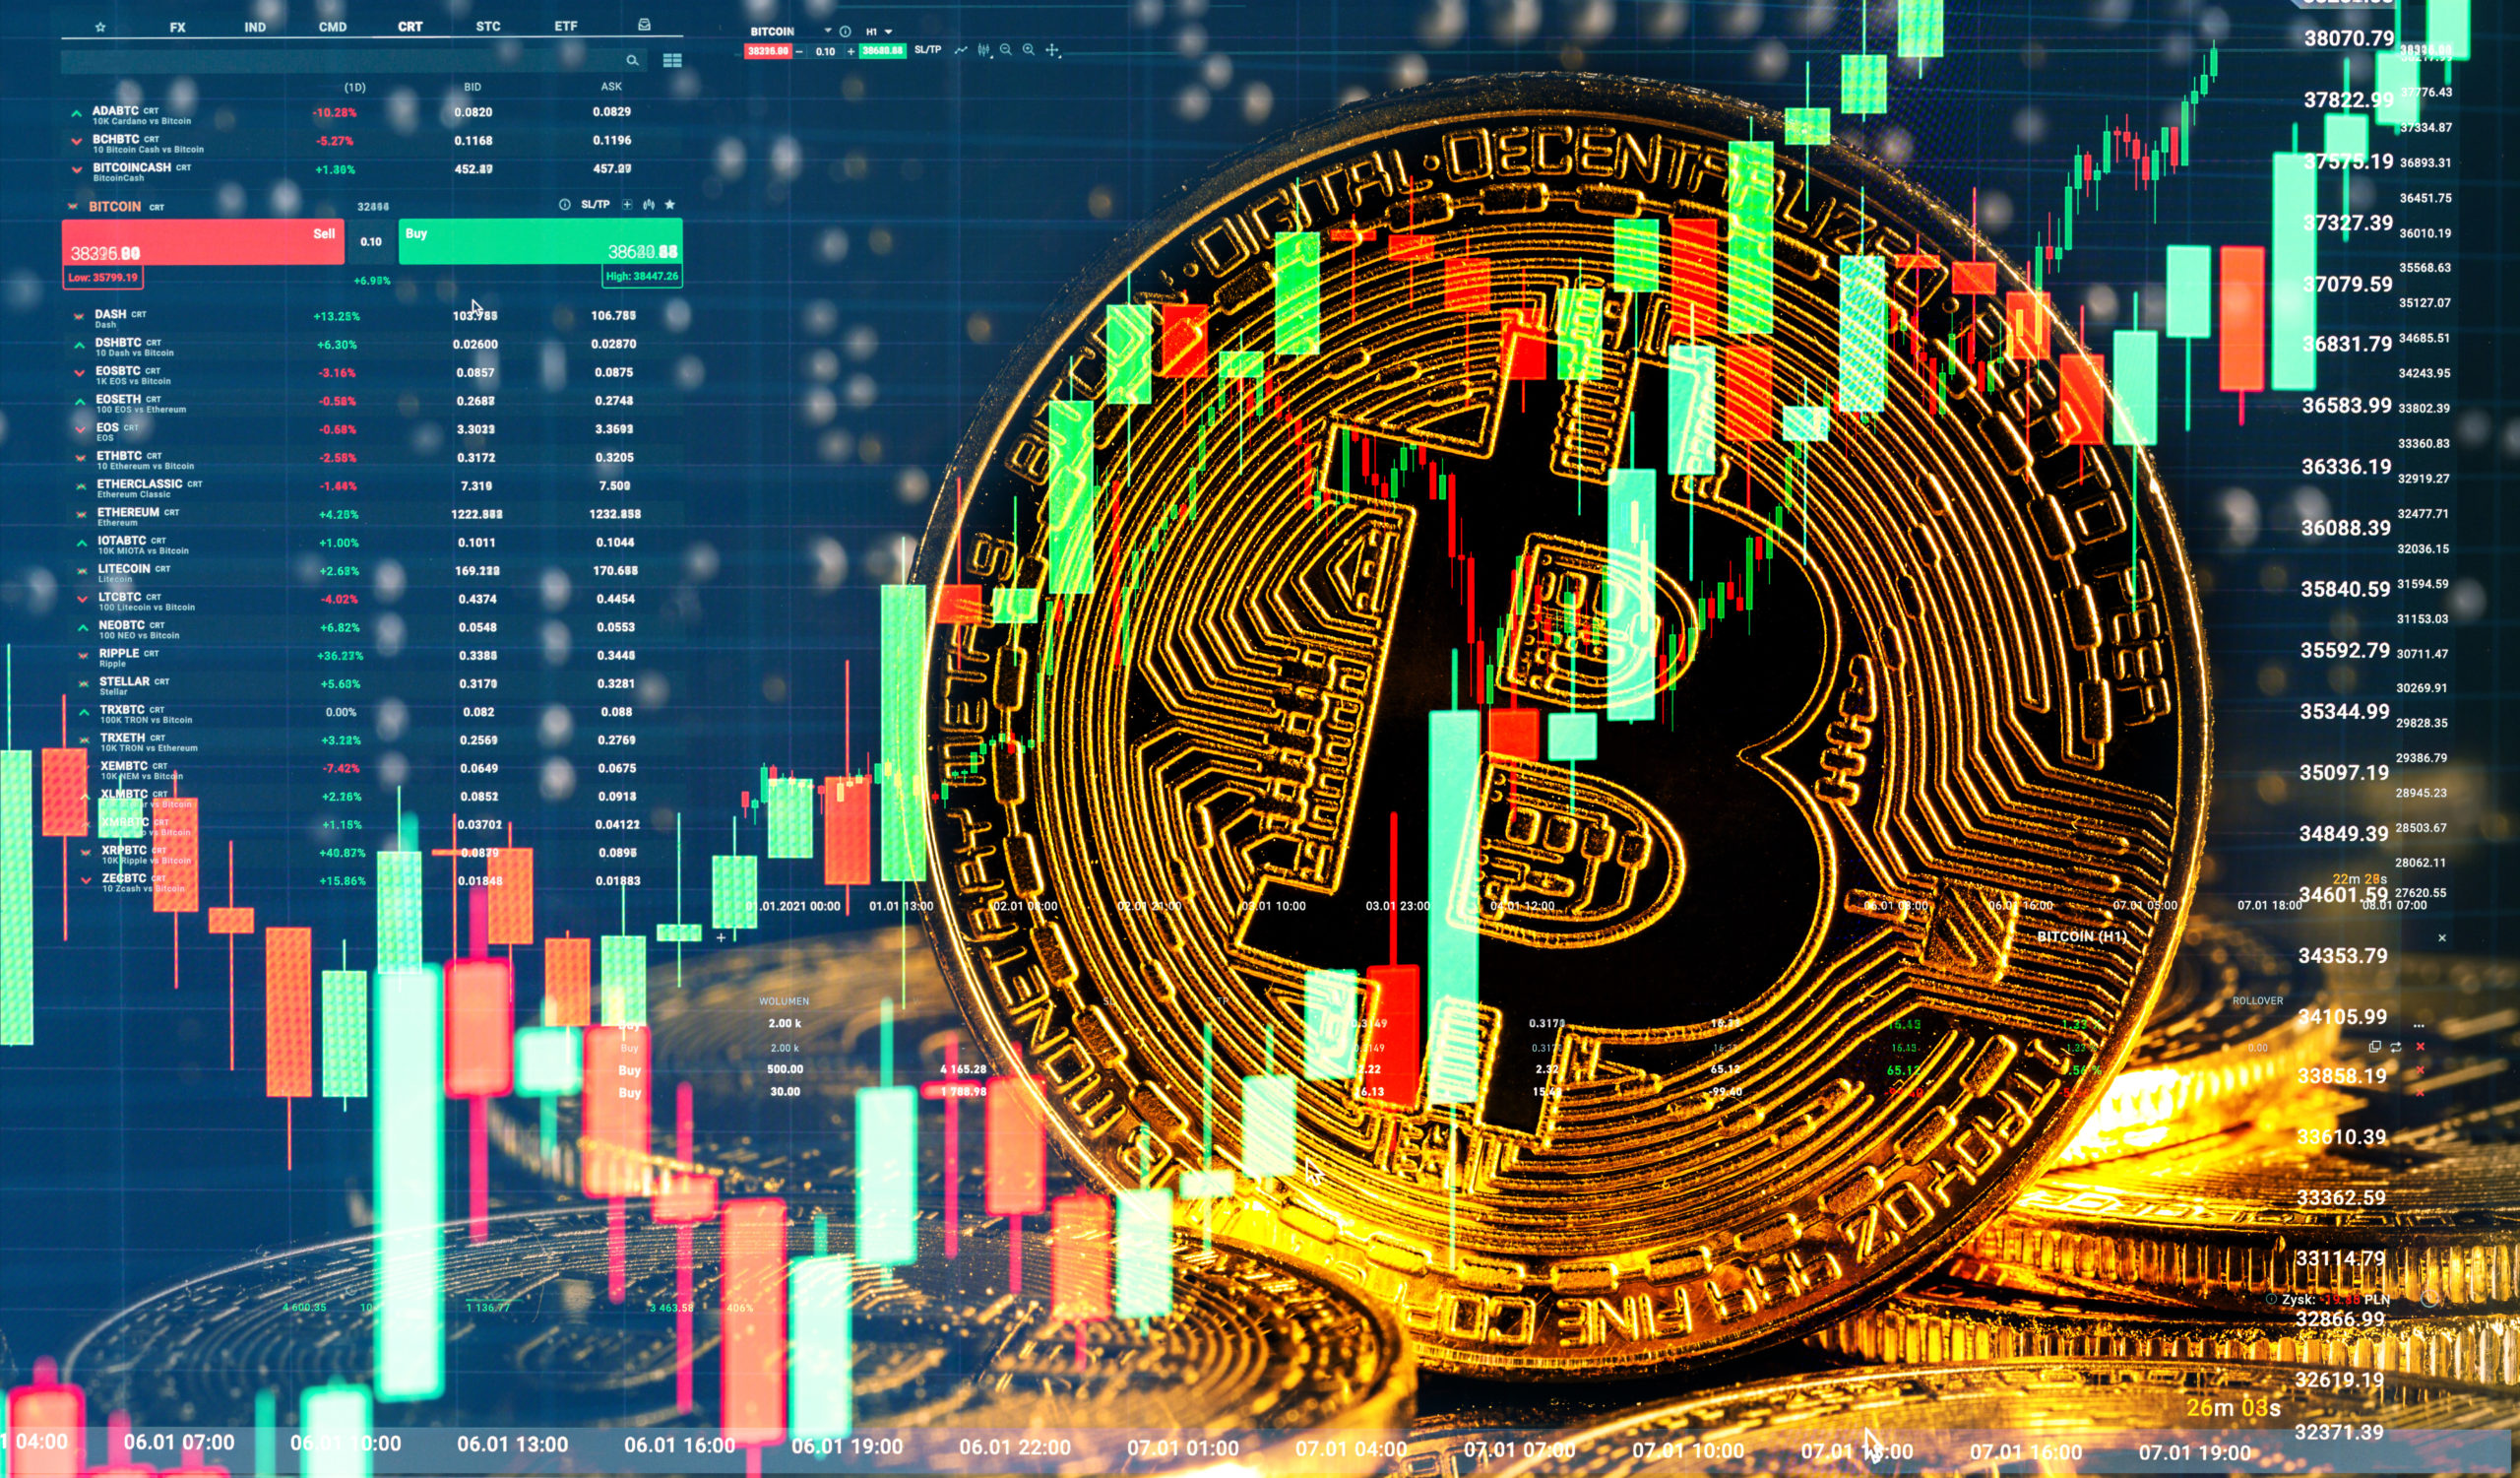 Bitcoin price dips under $21K while exchanges see record outflow trend